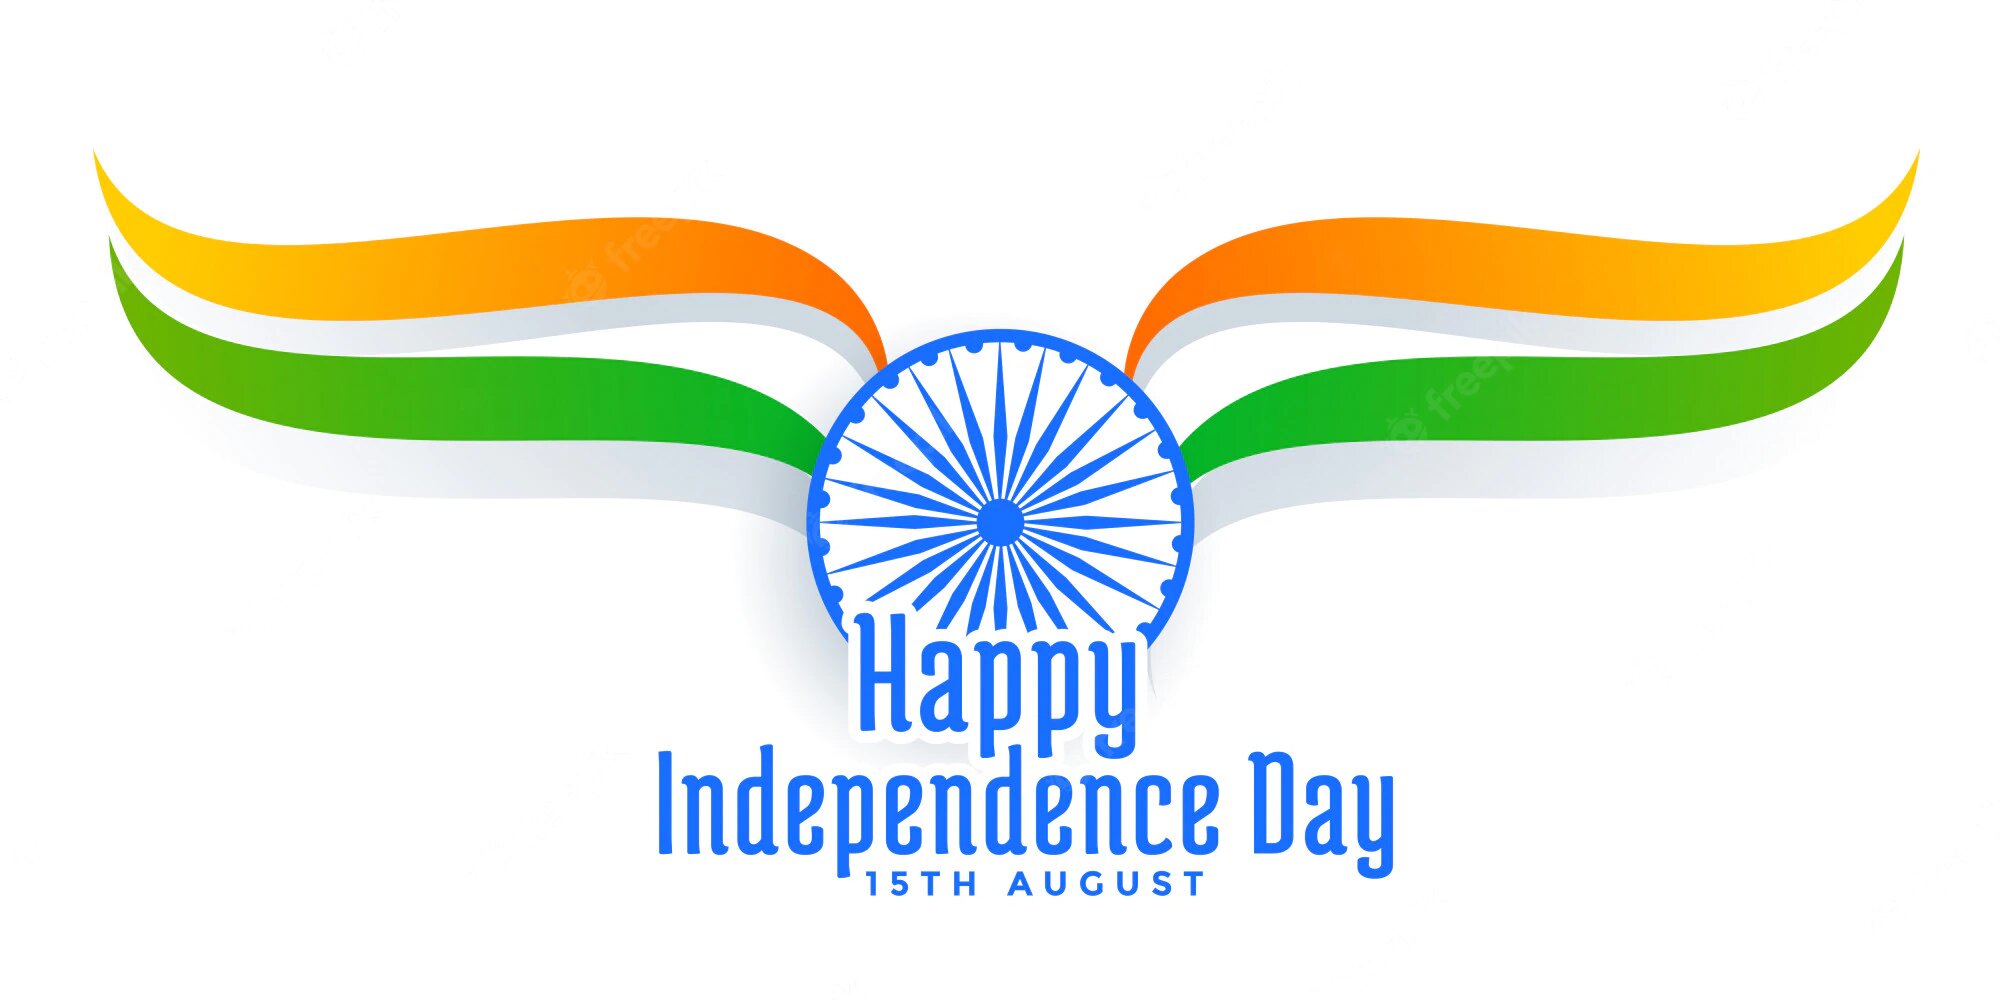 Brahminji-15th-august-happy-independence-day-india